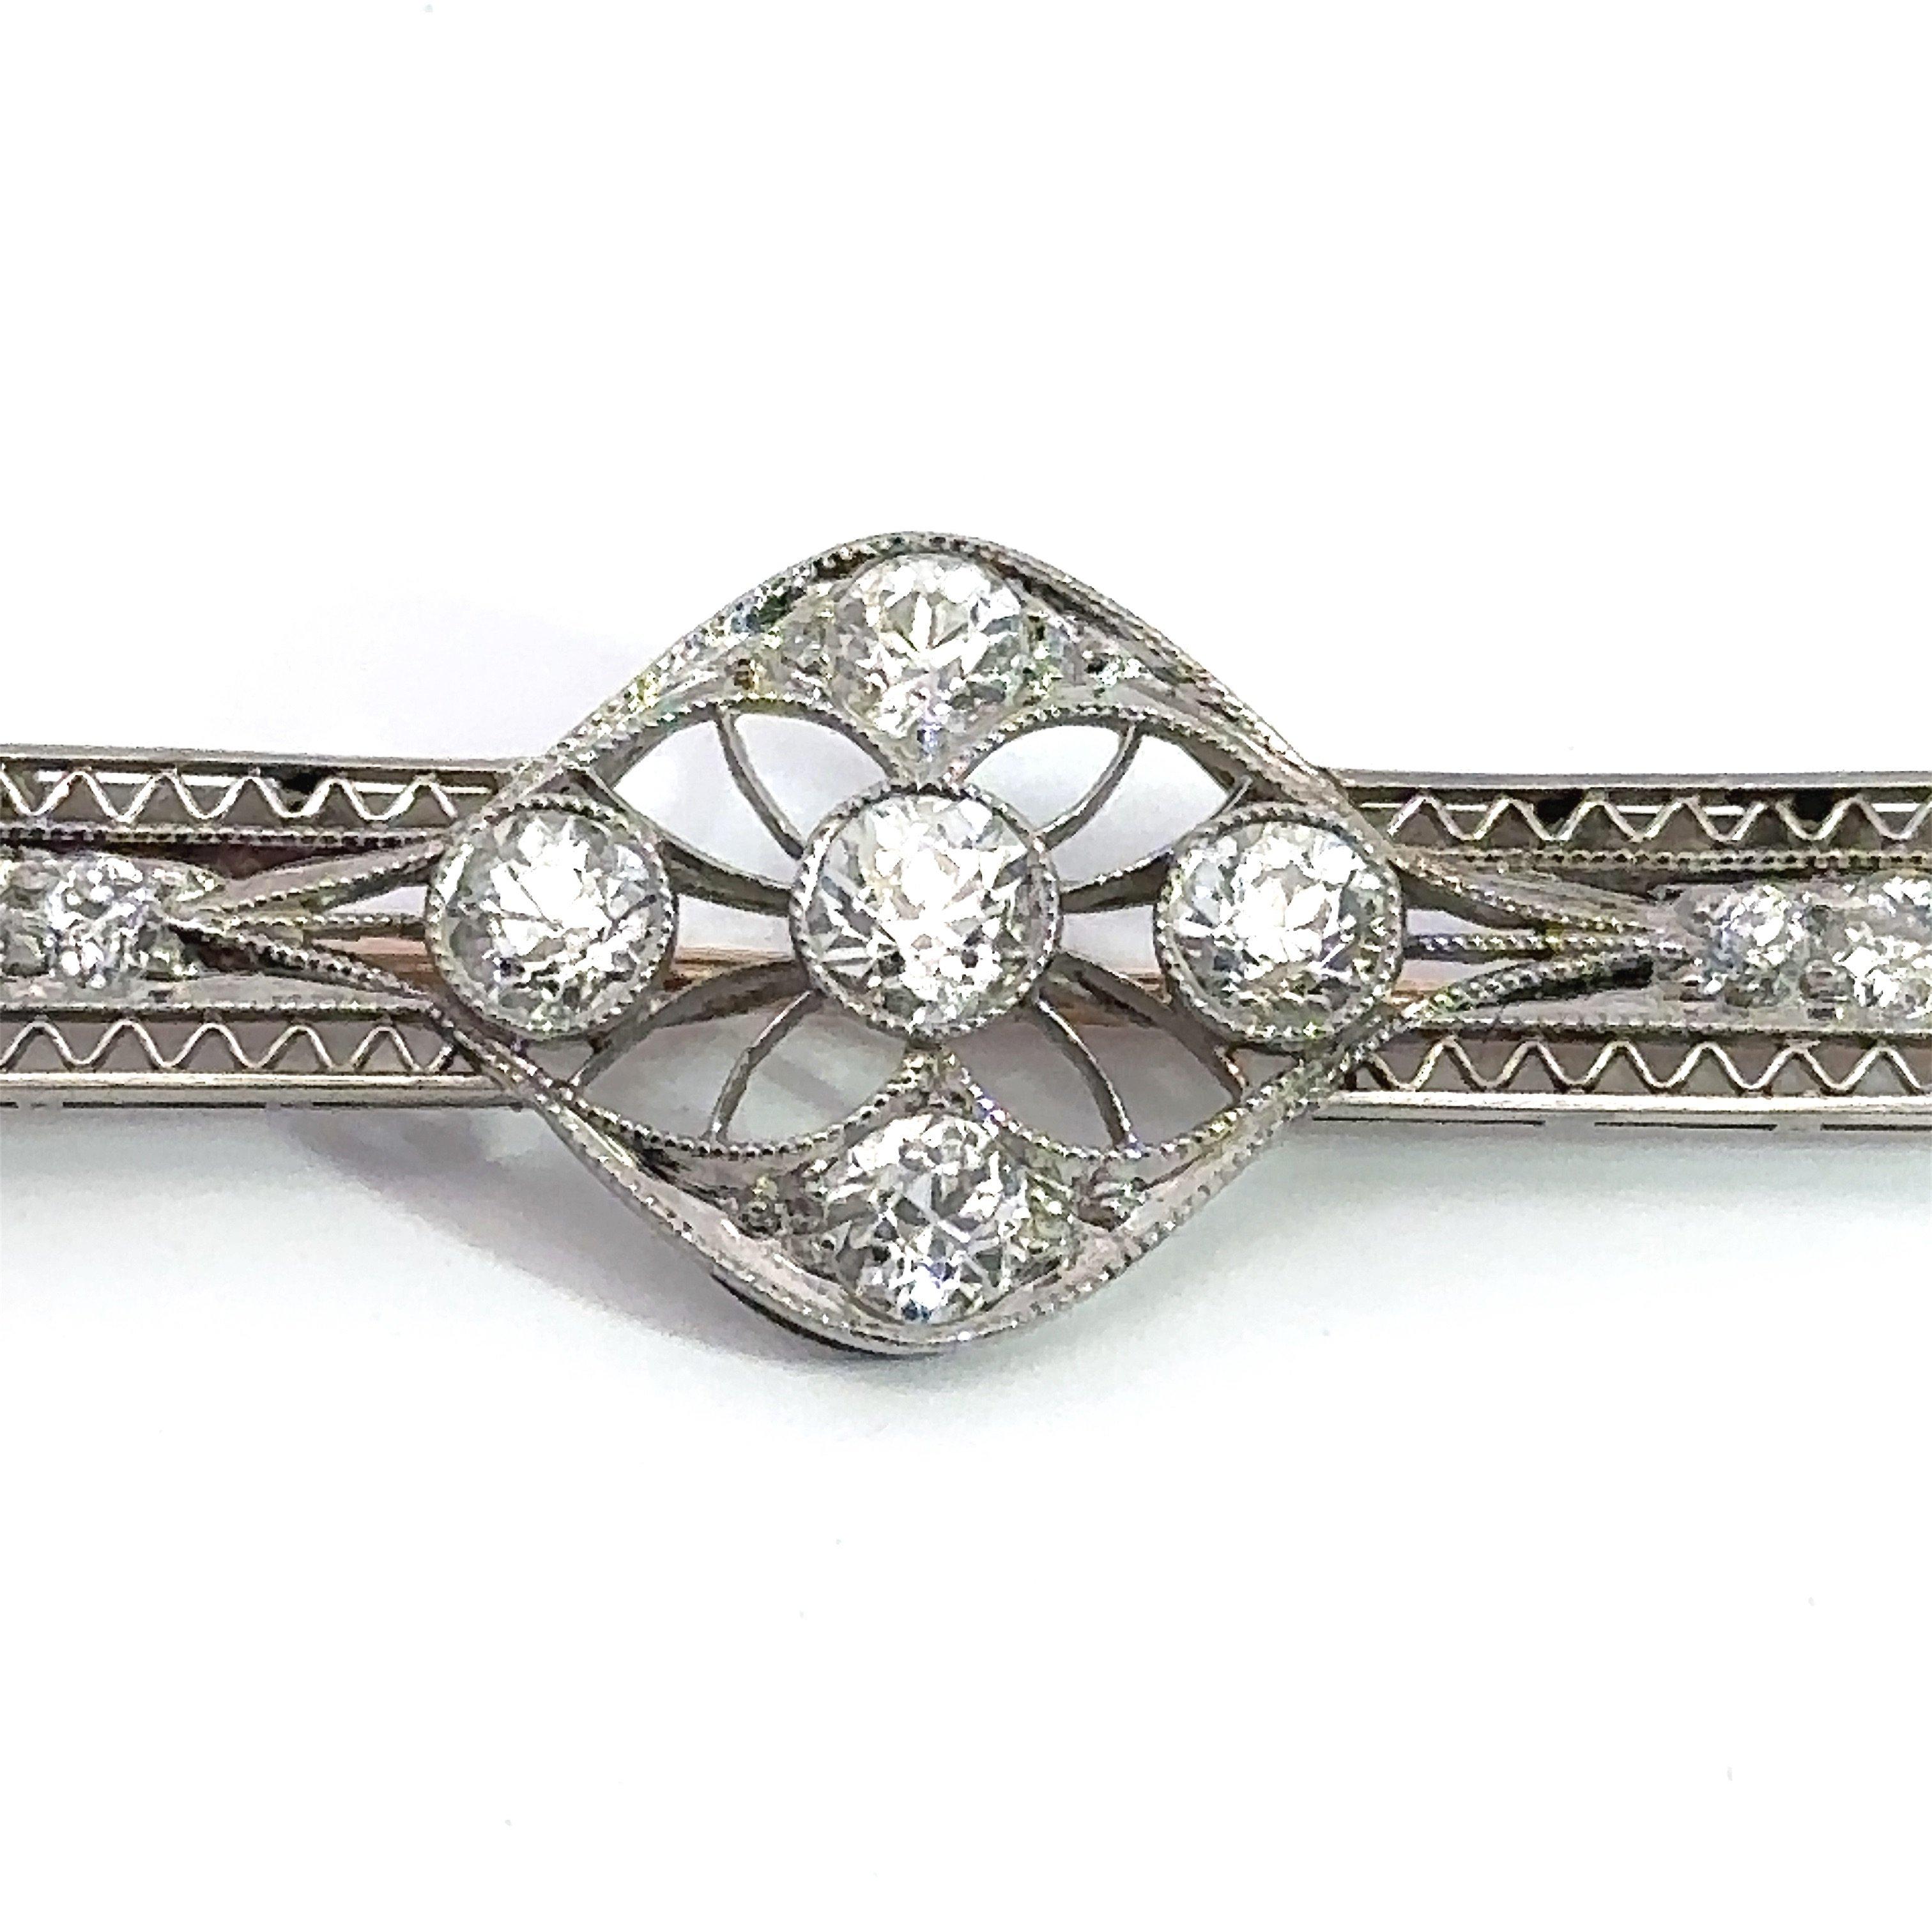 This Art Deco 1920’s-era brooch pin is crafted in platinum with 10KT yellow gold stick pin. The pin contains 2CT old-mine cut and old-European cut diamonds, F-H Color, VS-SI Clarity. The pin measures 3